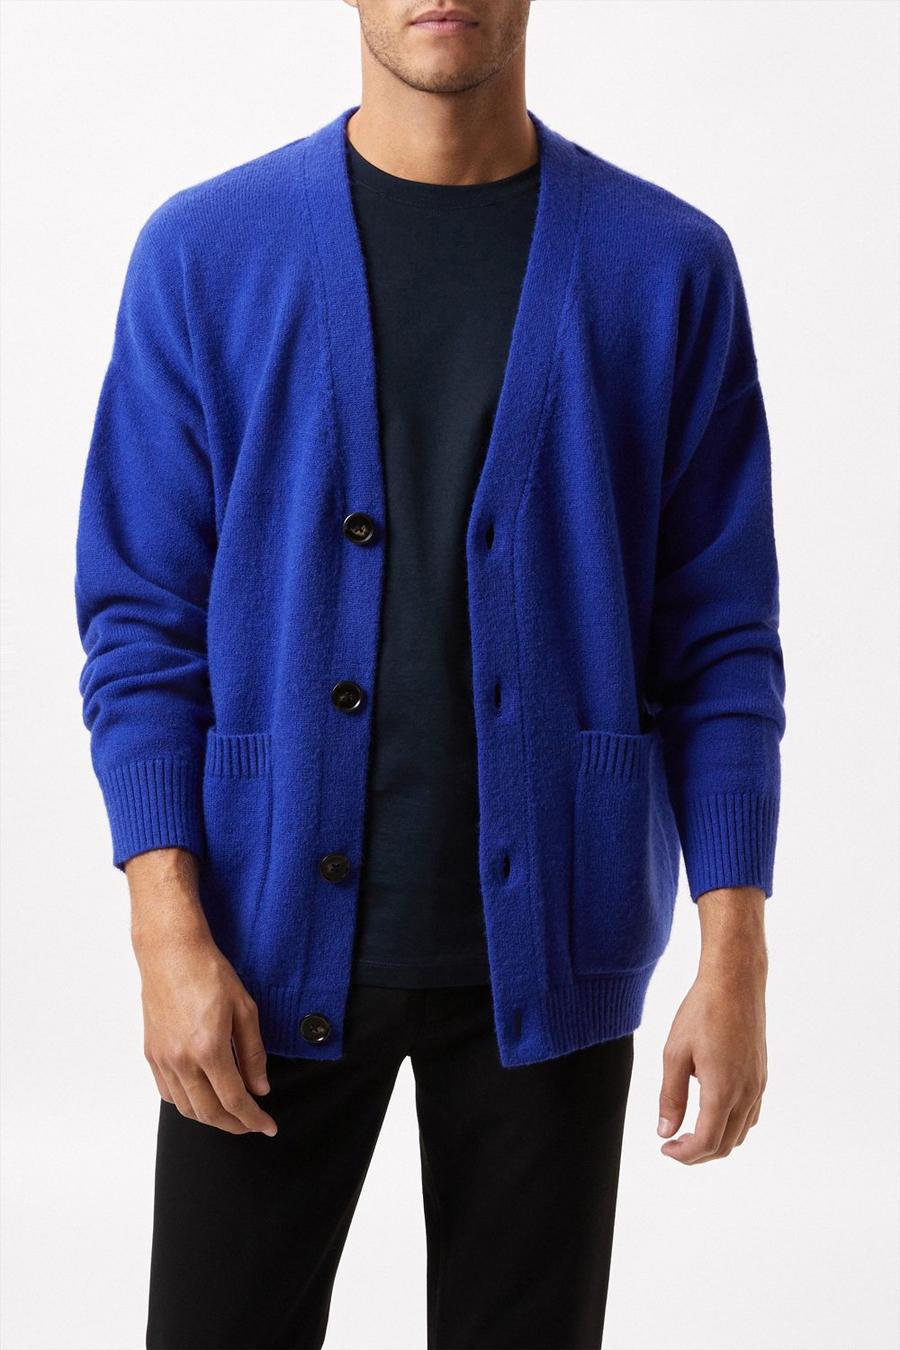 Super Soft Cobalt Relaxed Fit Knitted Cardigan